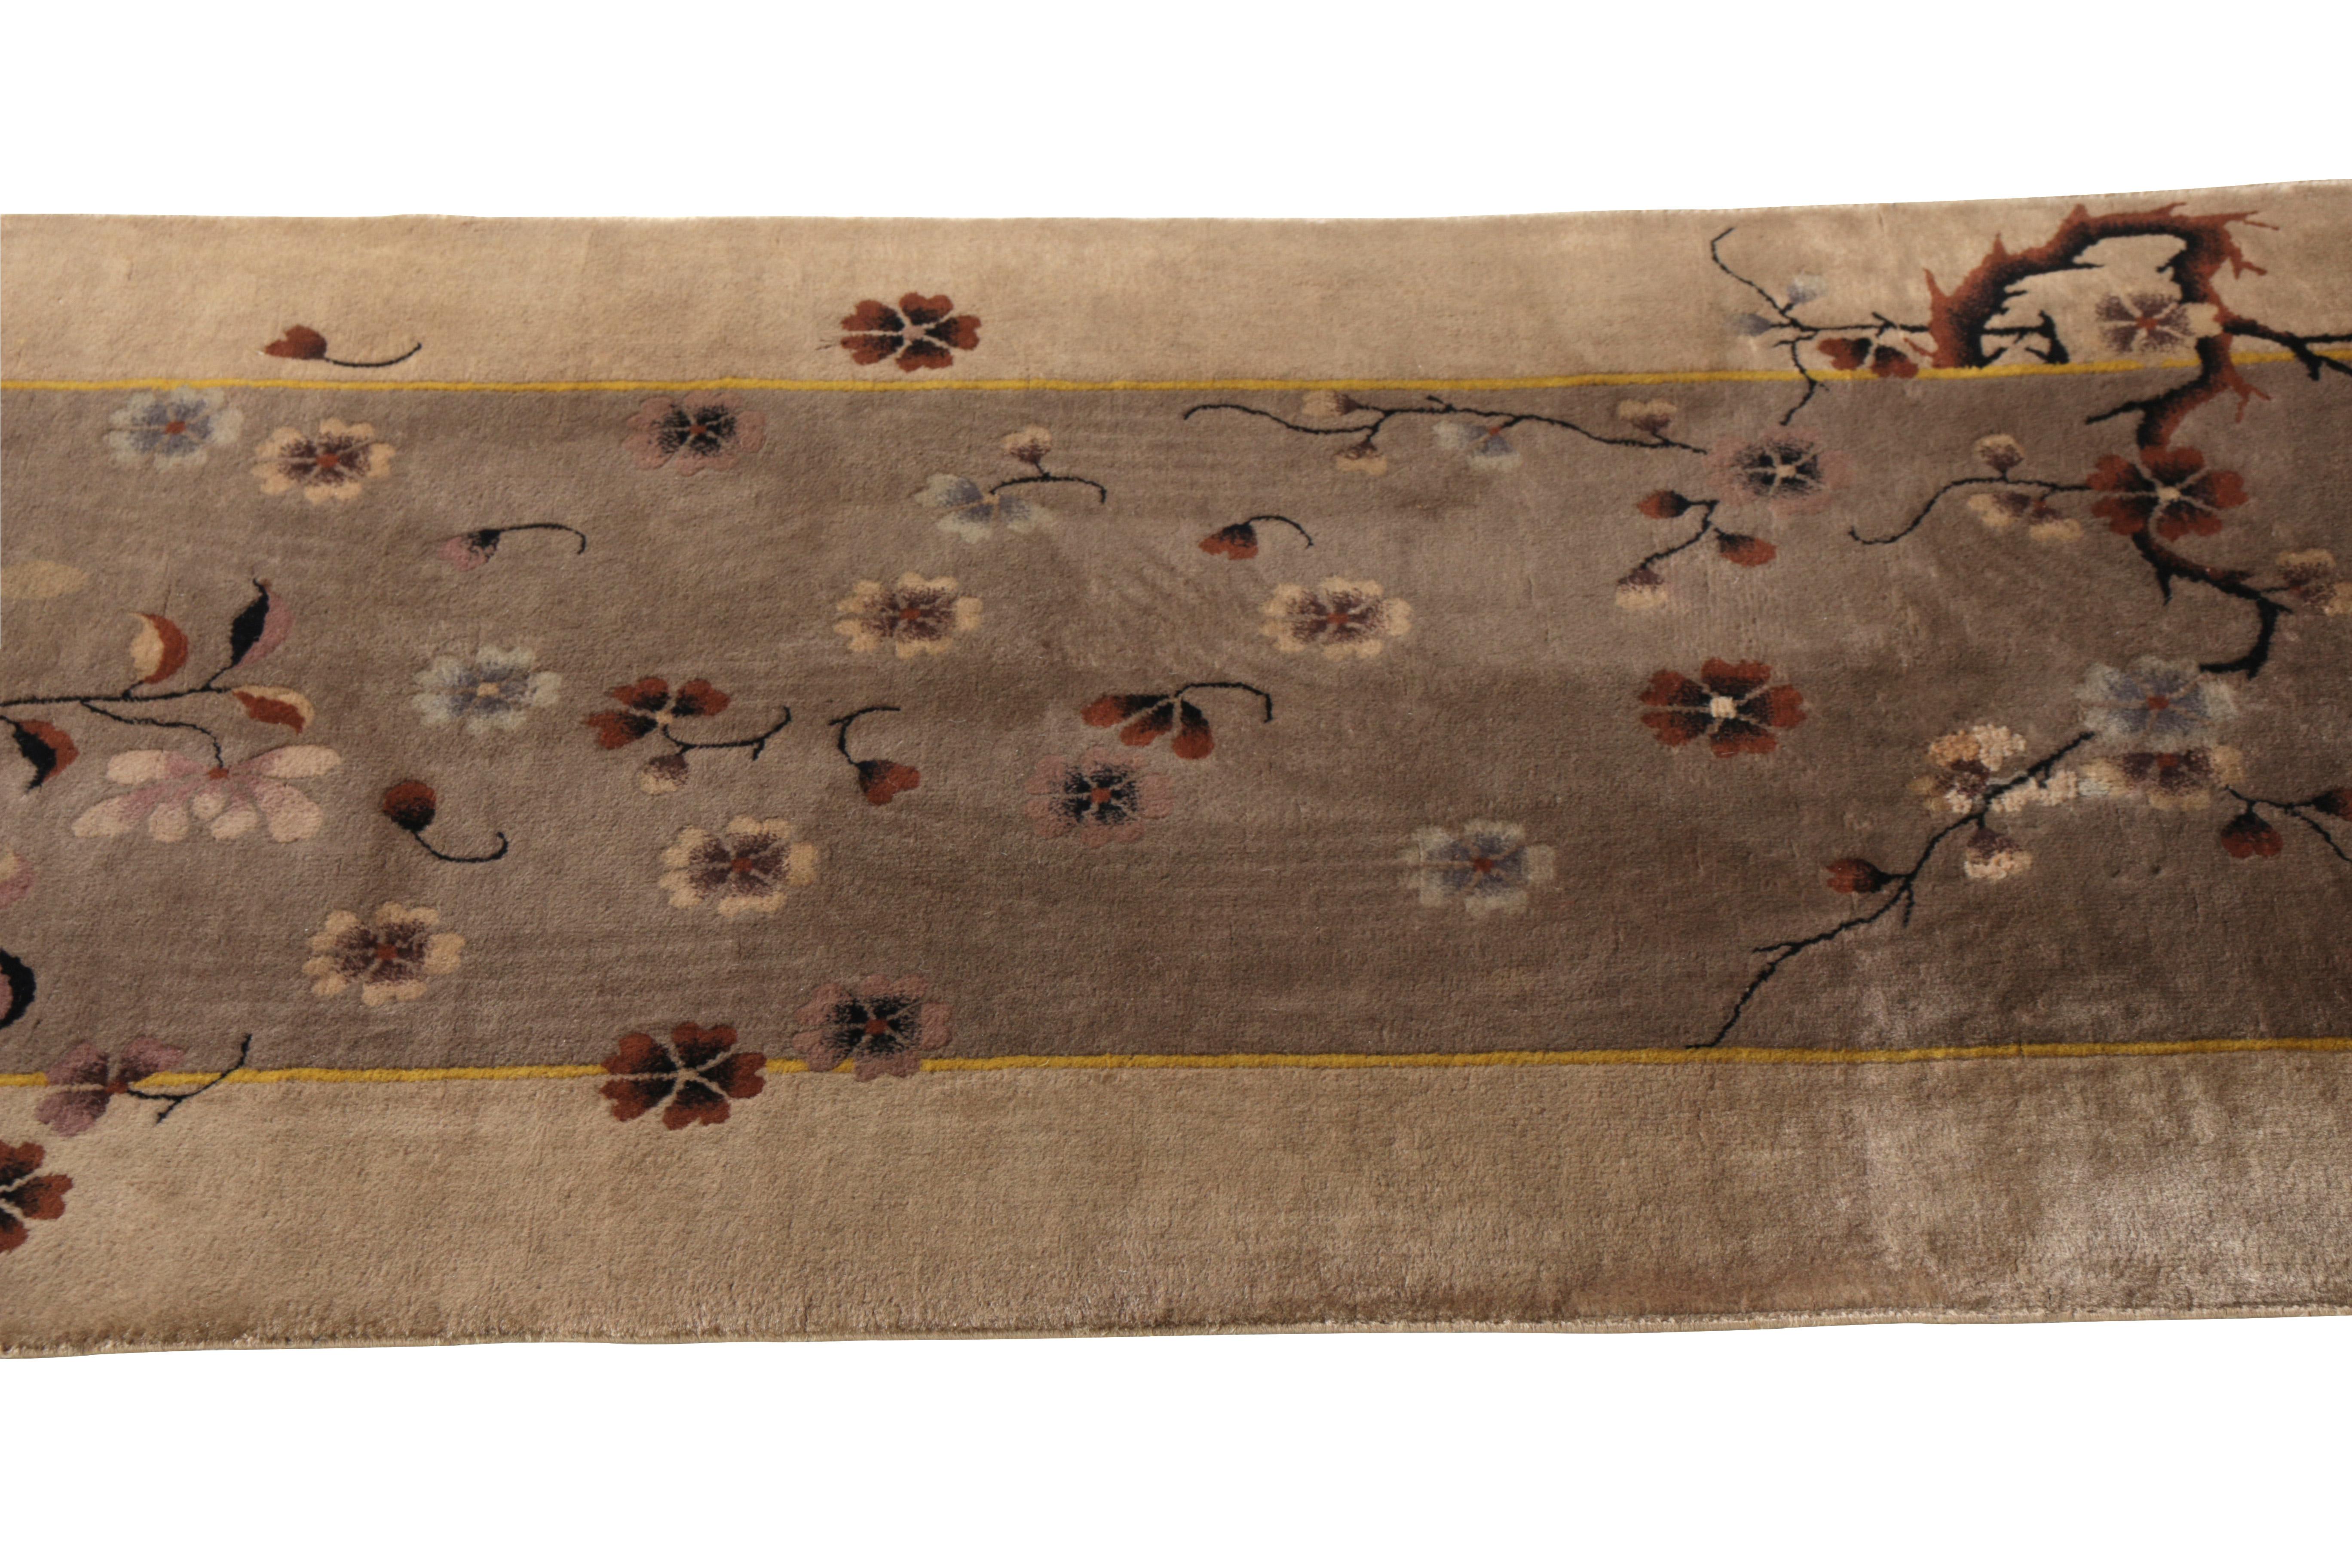 Hand-Knotted 1920s Antique Art Deco Rug Beige Brown Chinese Floral Pattern